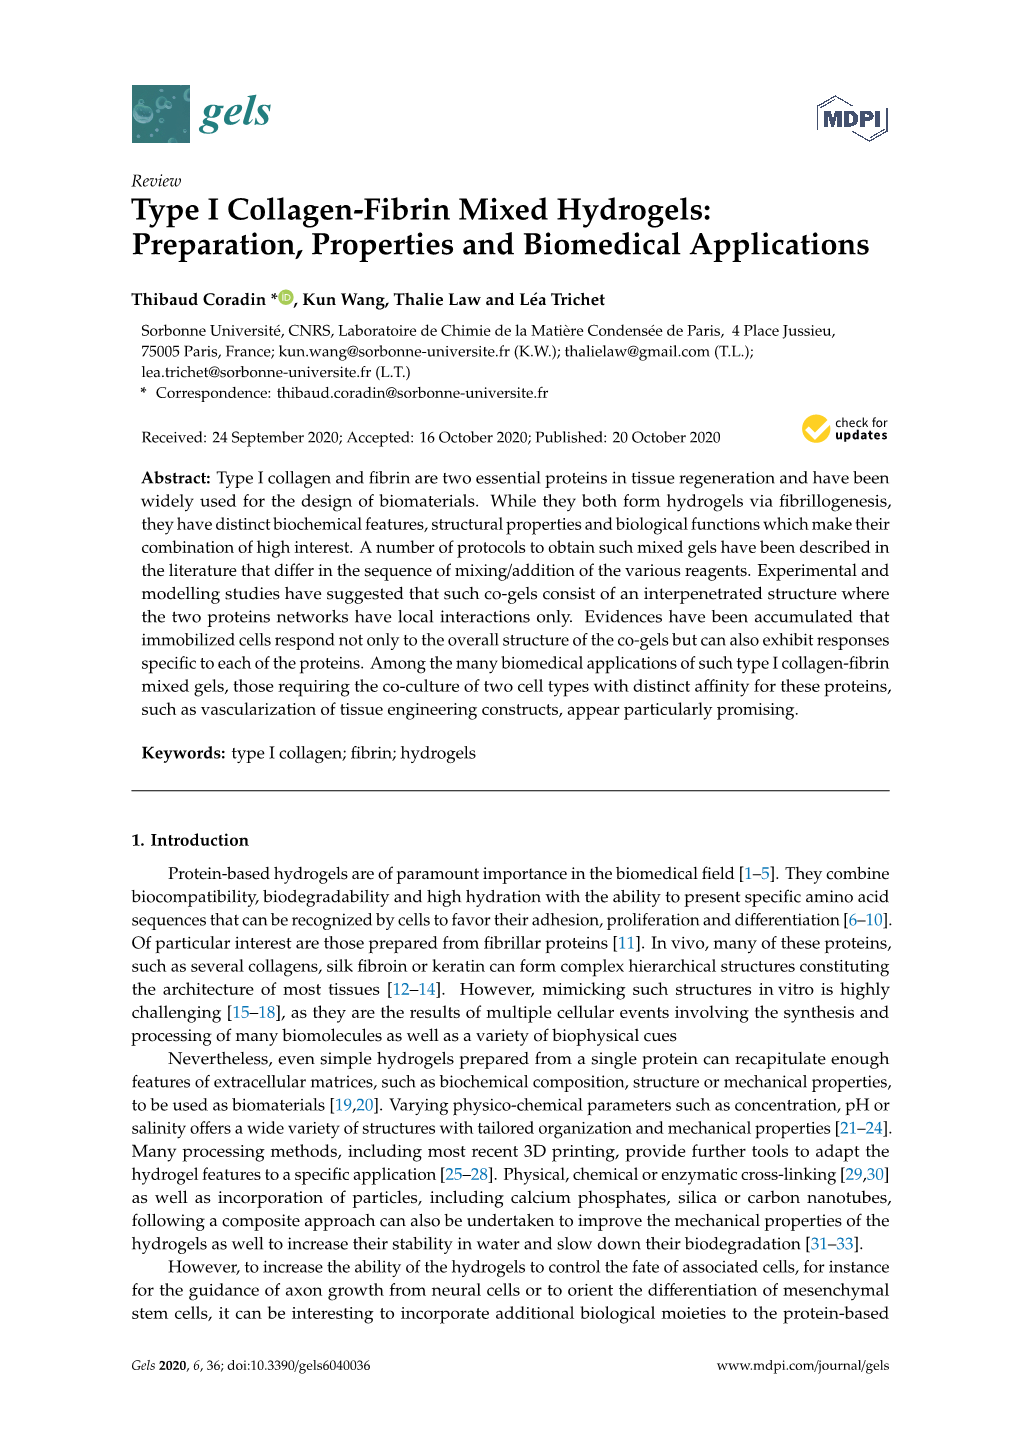 Type I Collagen-Fibrin Mixed Hydrogels: Preparation, Properties and Biomedical Applications